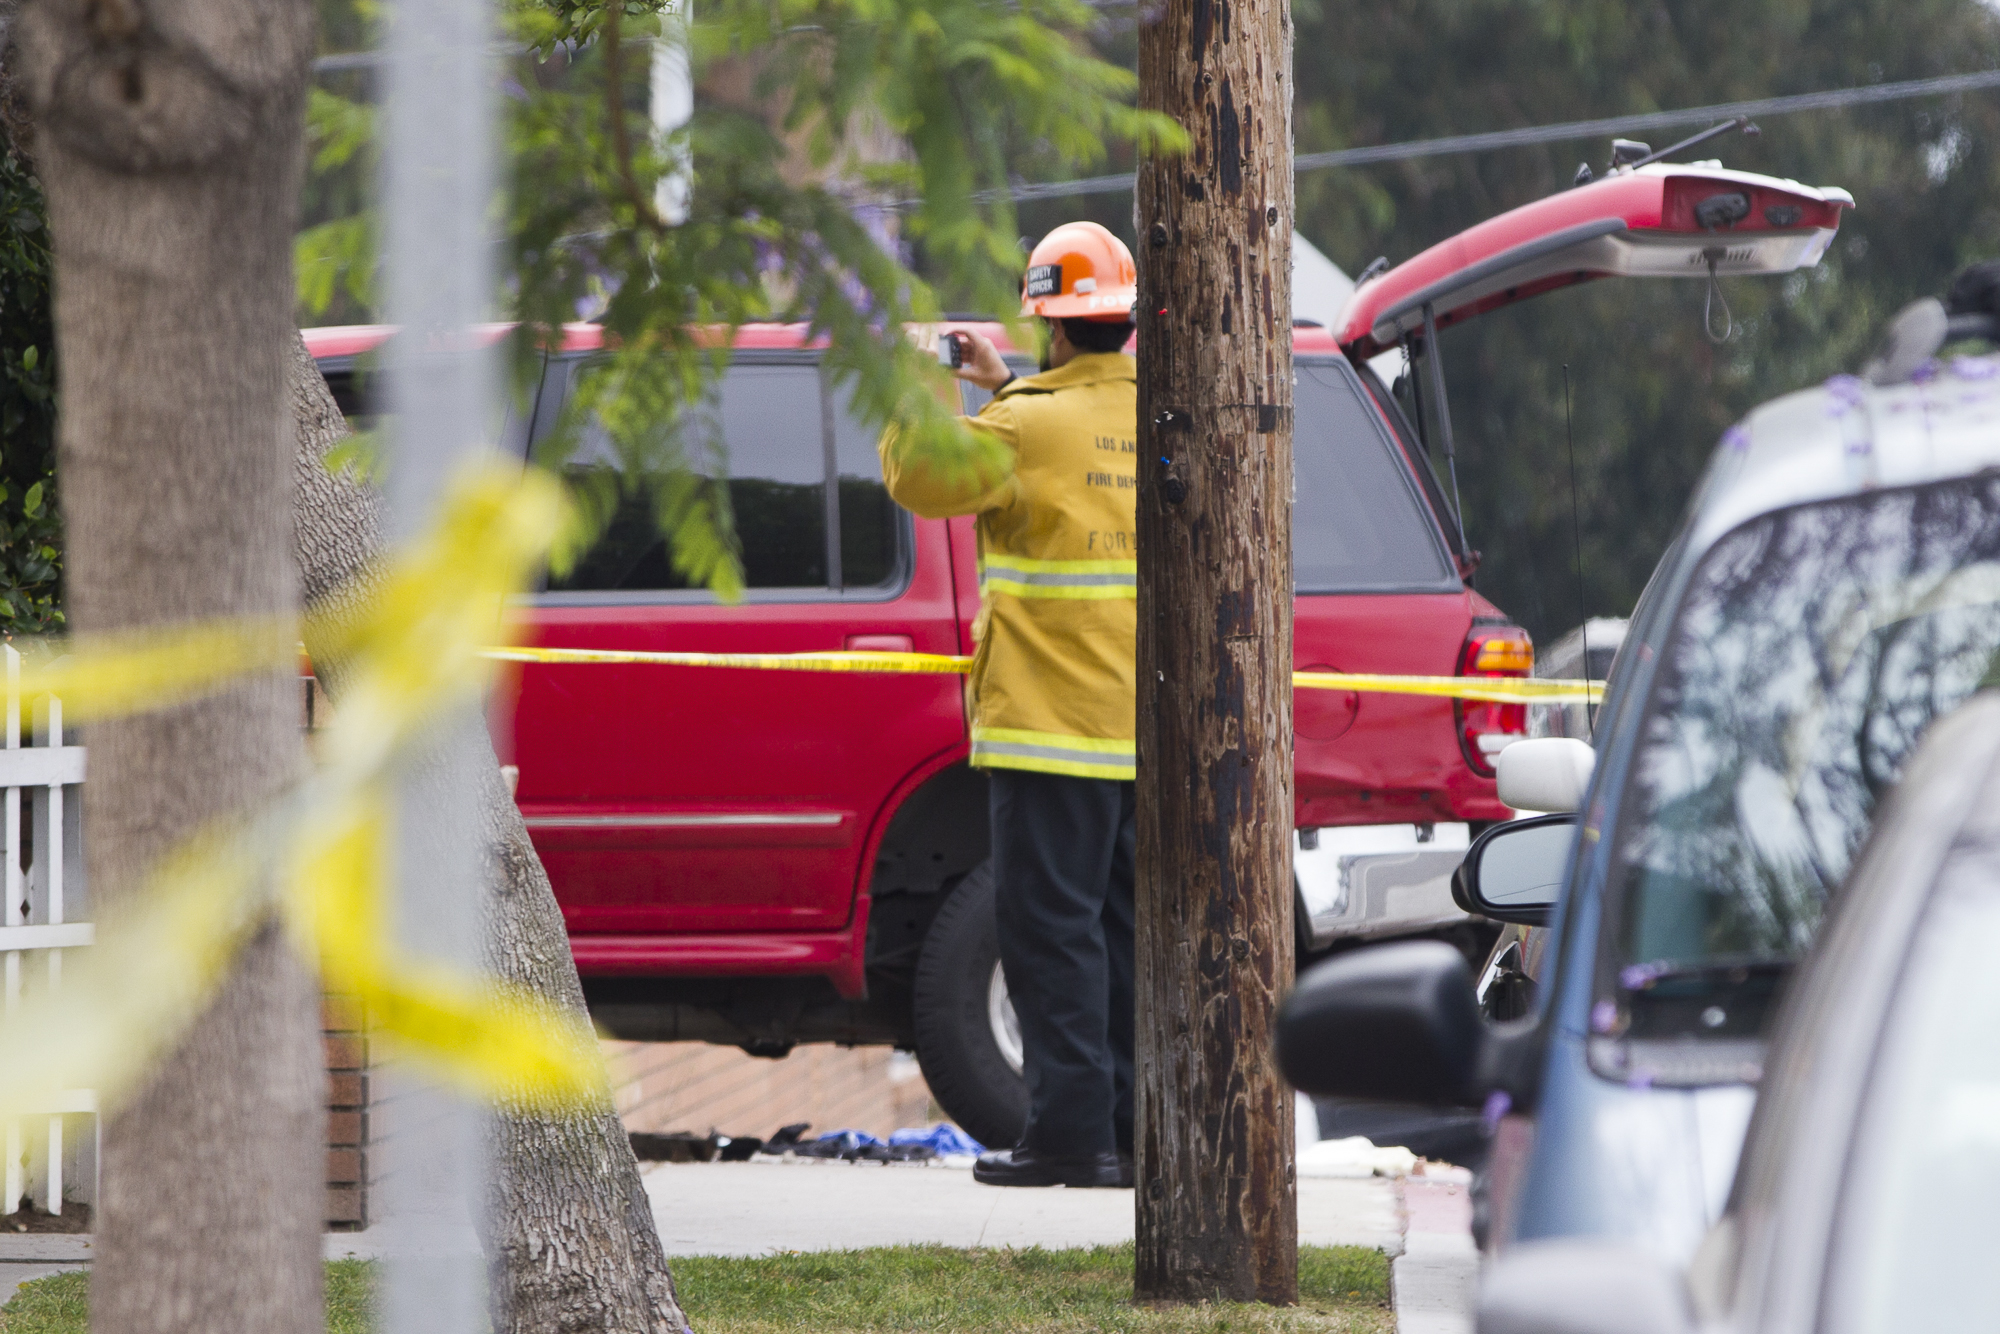  Fire department personnel investigate one of the vehicles involved in the Santa Monica College shooting at the main campus off of Pearl Street on June 7, 2013 in Santa Monica, California. The vehicle was determined to belong to shooting victims, Car